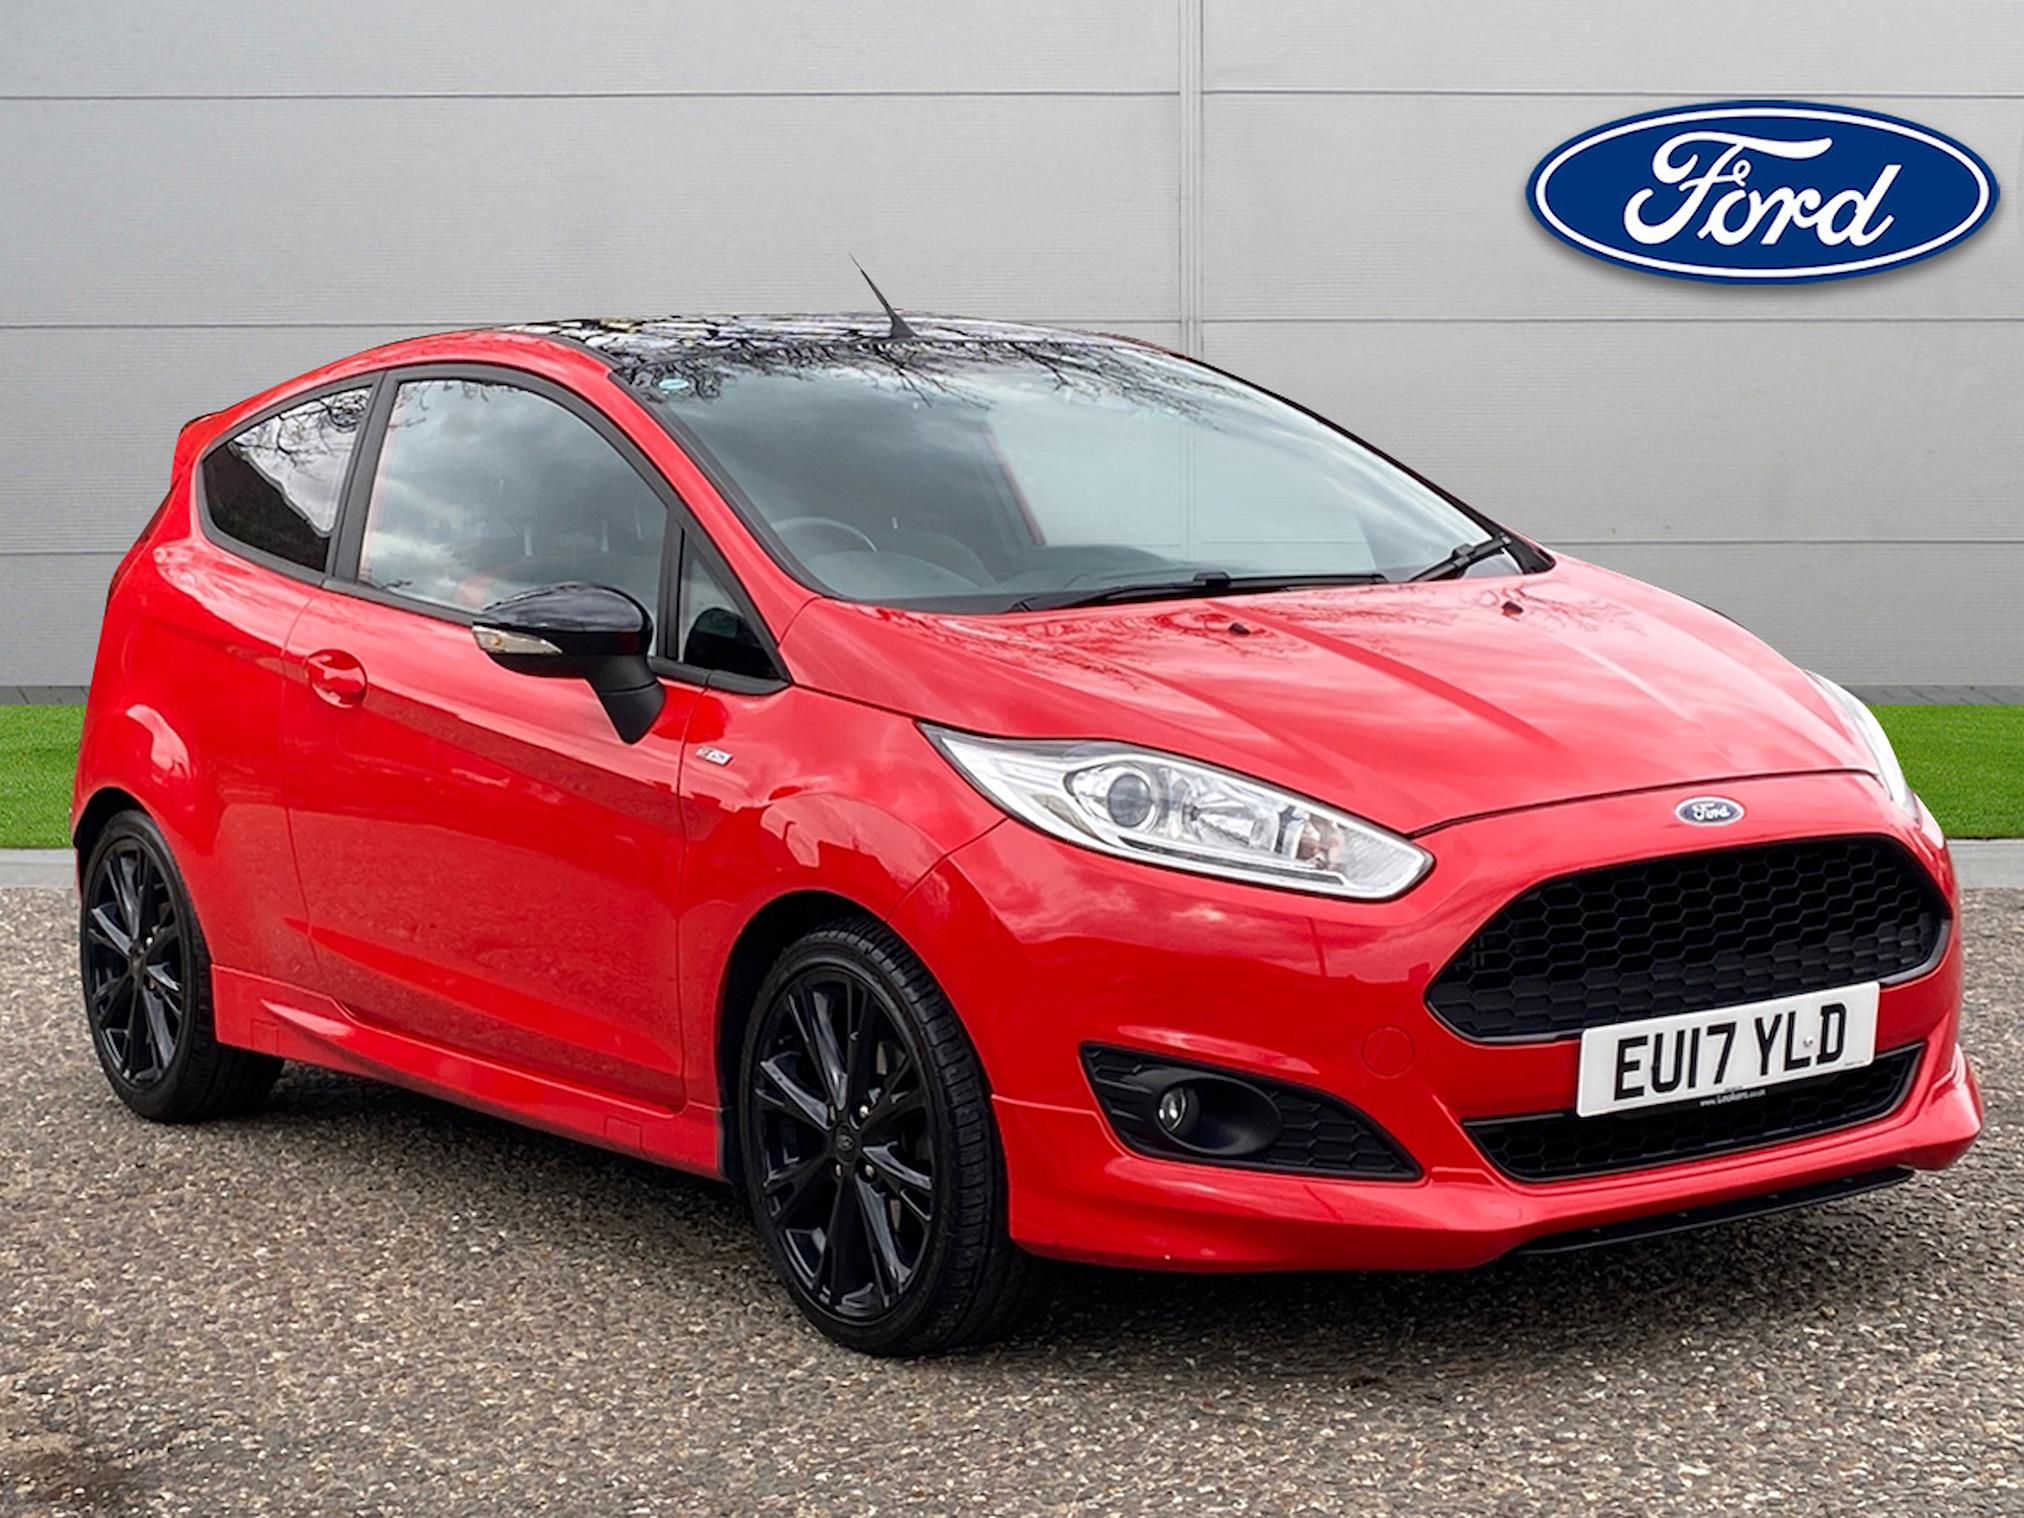 Used FORD FIESTA 1.0 Ecoboost 140 St-Line Red 3Dr 2017